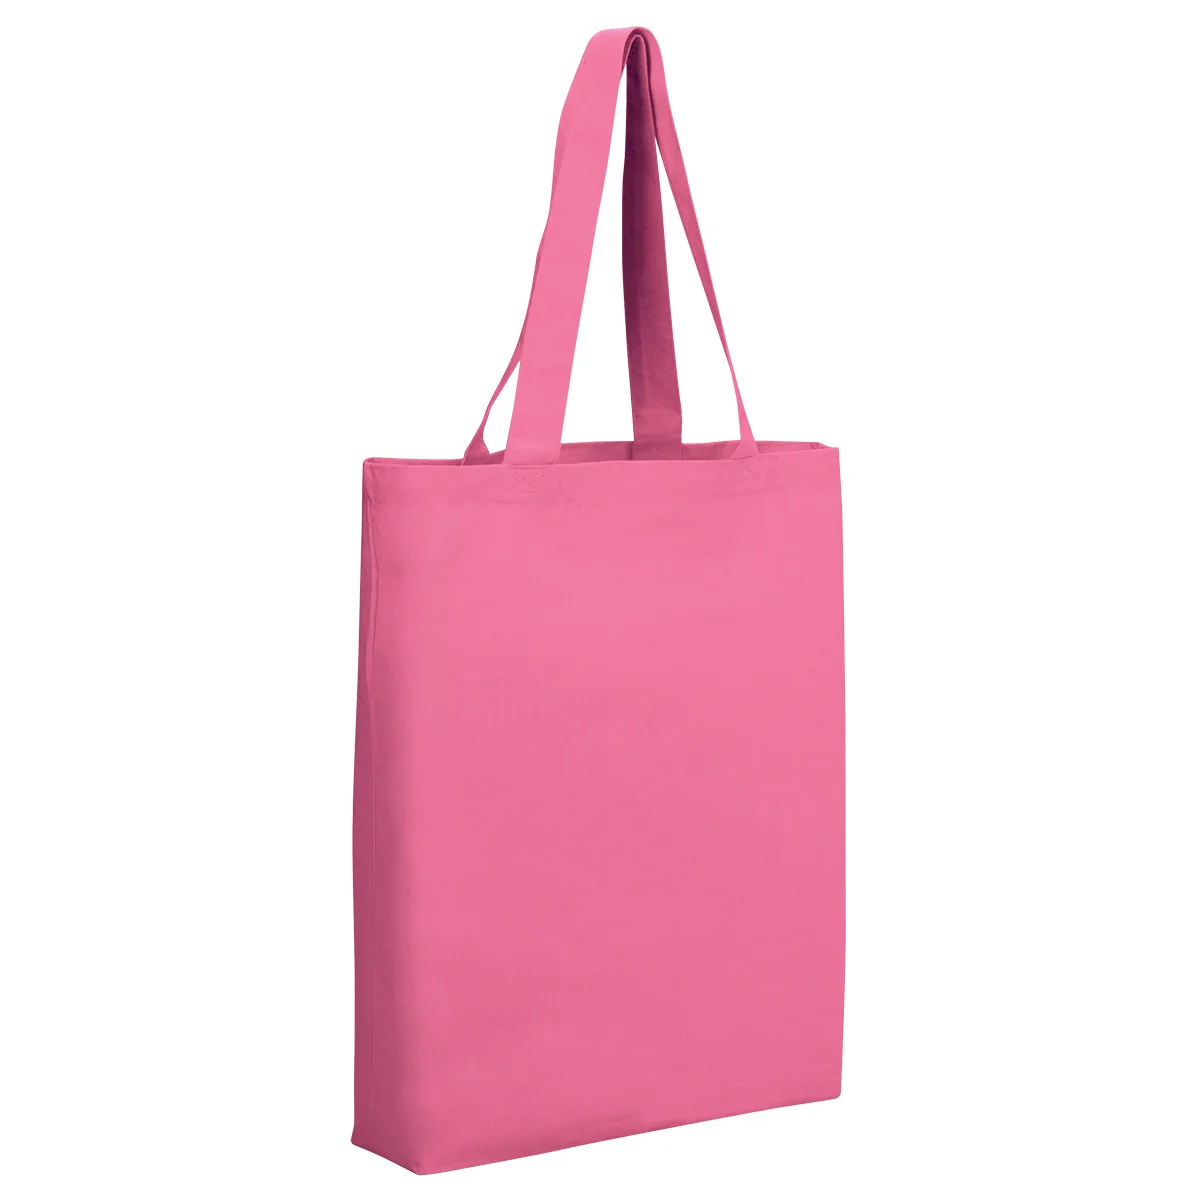 Economical Tote Bag with Bottom Gusset eco-friendly in 26 colors 100% cotton sheeting